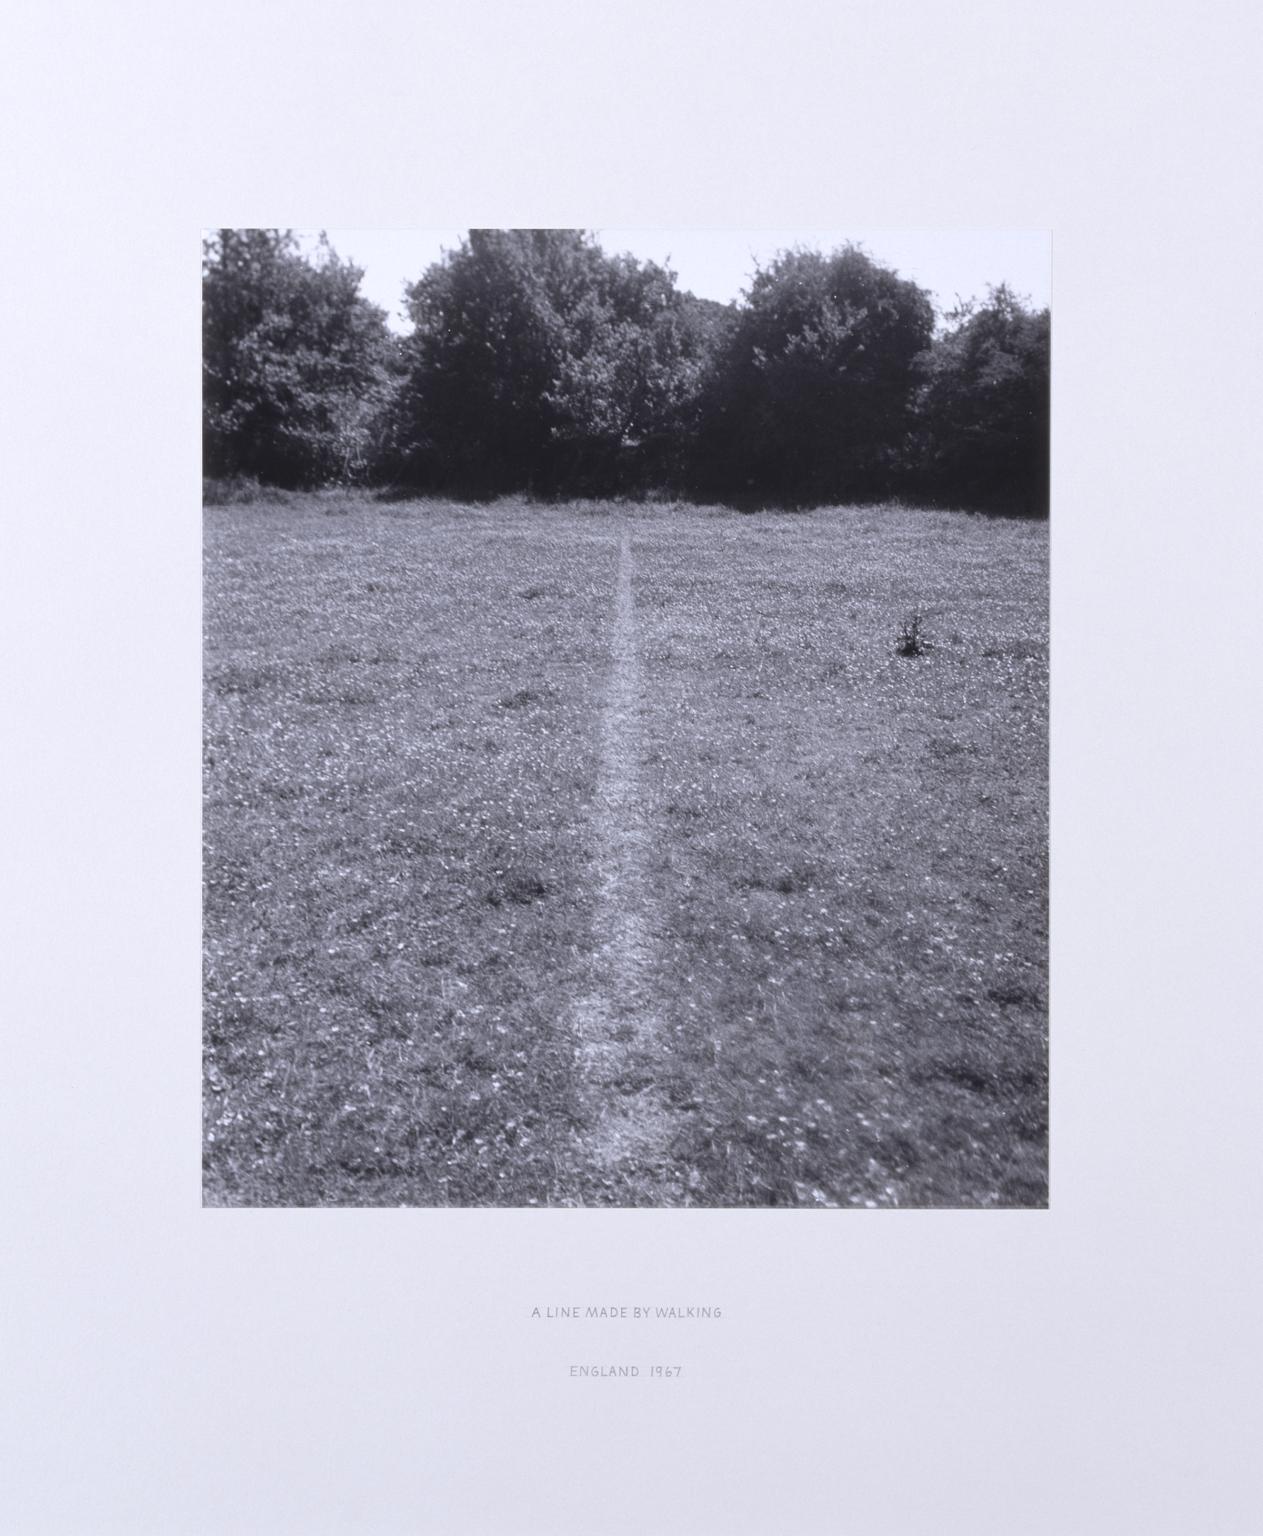 Richard Long "A Line Made by Walking"